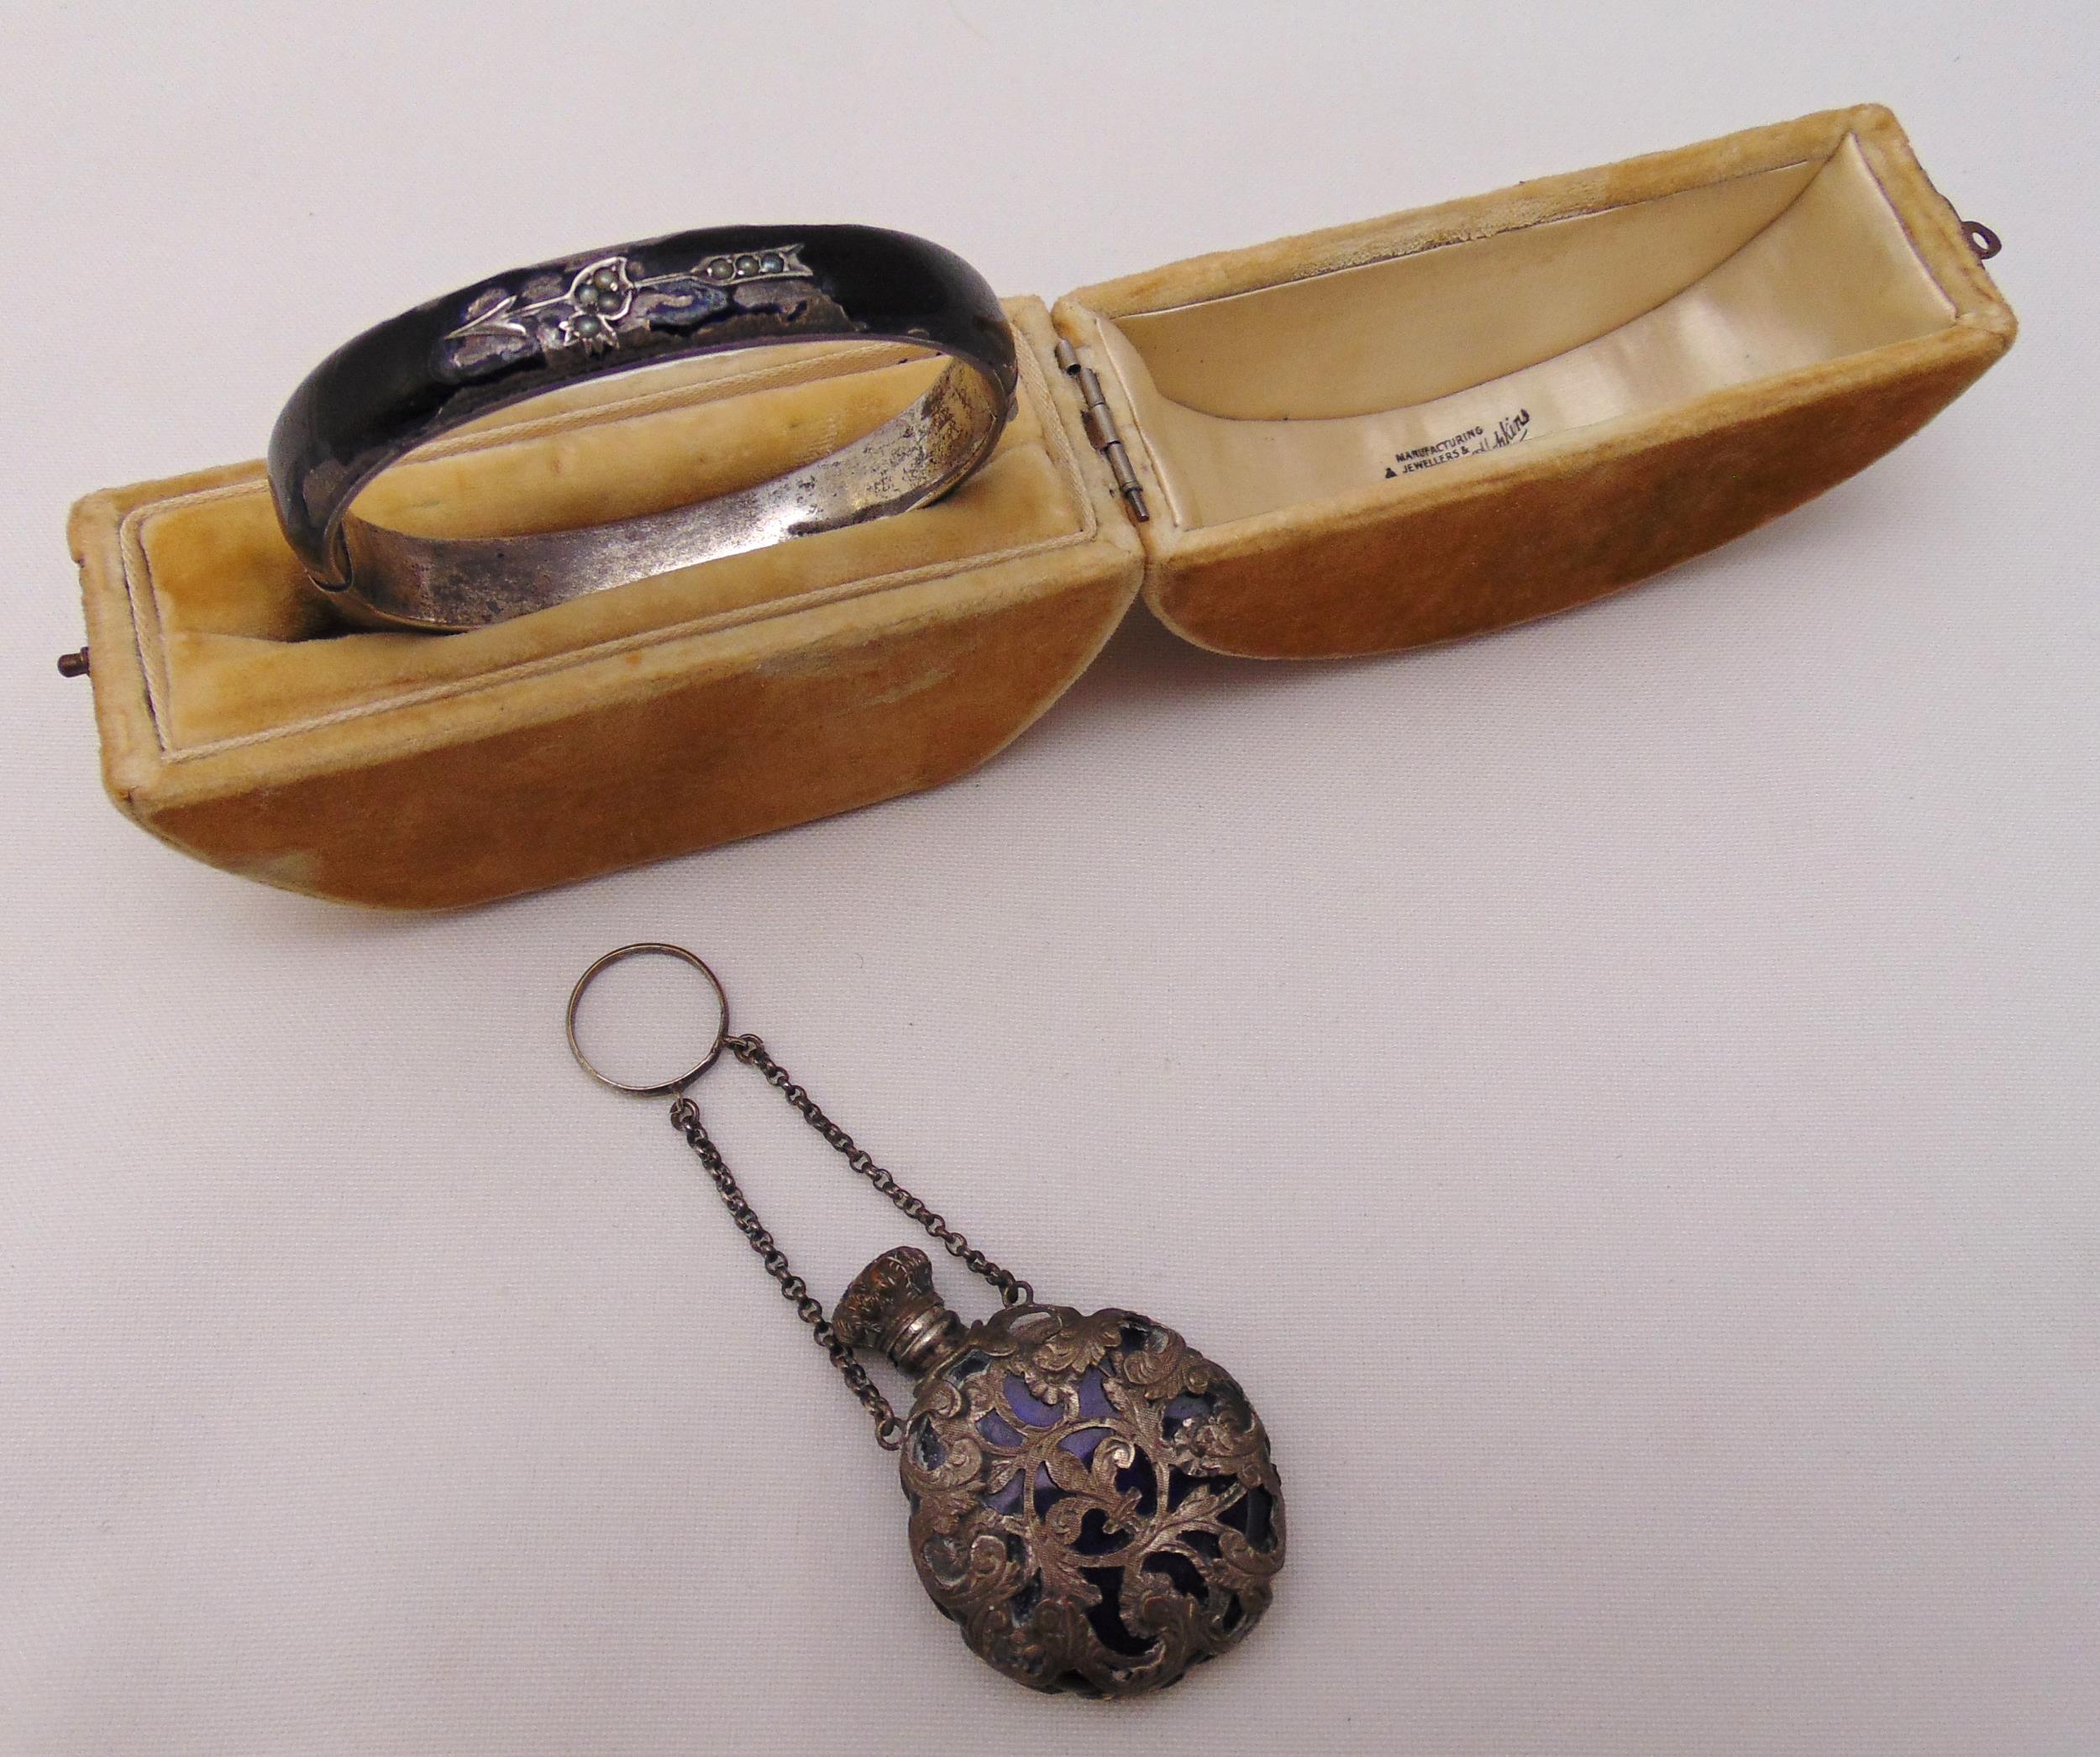 Enamel and silver 19th century mourning bangle in original fitted case and a scent bottle on a